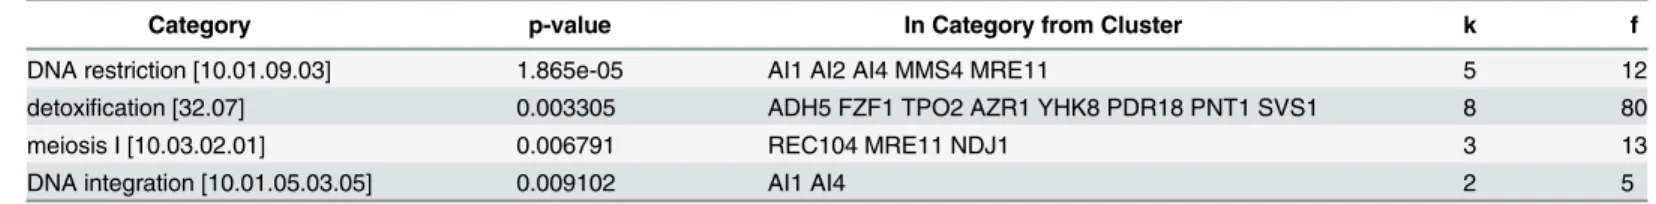 Table 3. MIPS functional classification of &gt; 2-fold downregulated genes in response to Doxorubicin treatment (p value cutoff: 0.01).